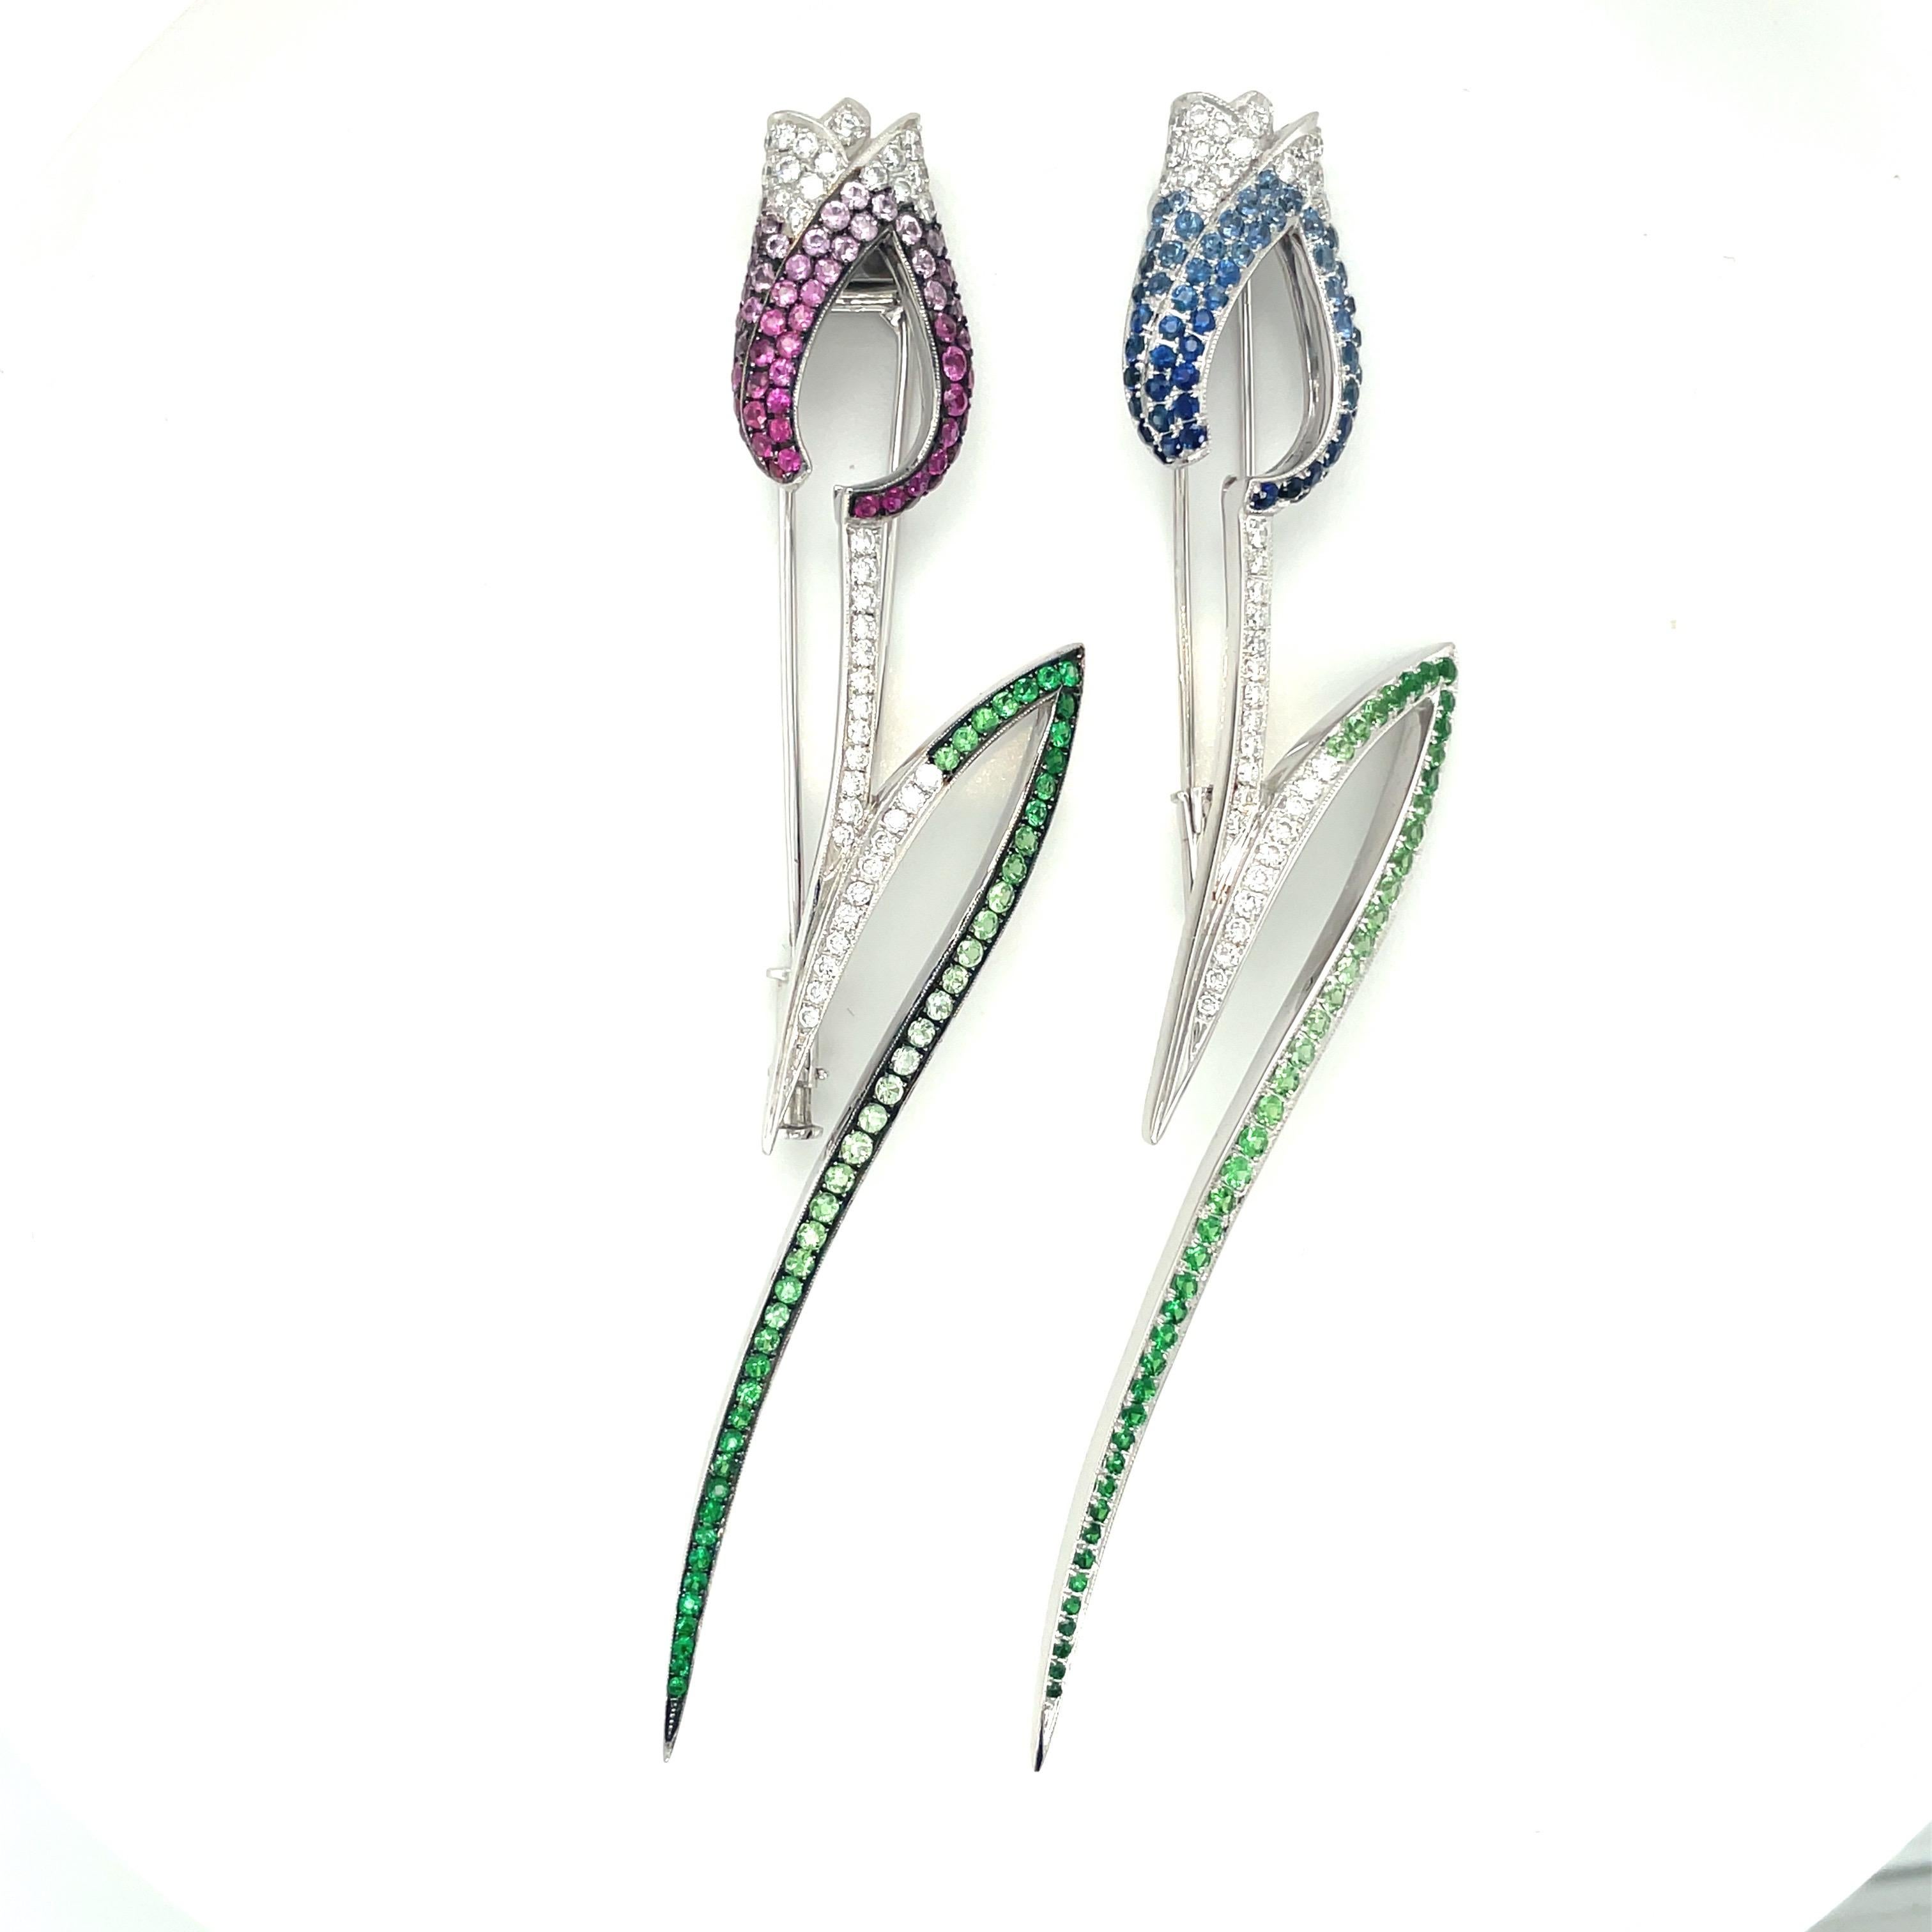 A beautifully designed 18 karat white gold tulip brooch. The flower is set with with shades of dark, transitioning to light  pink sapphires . Shades of green tsavorites are set as the leaf, with round brilliant diamonds accenting  this graceful